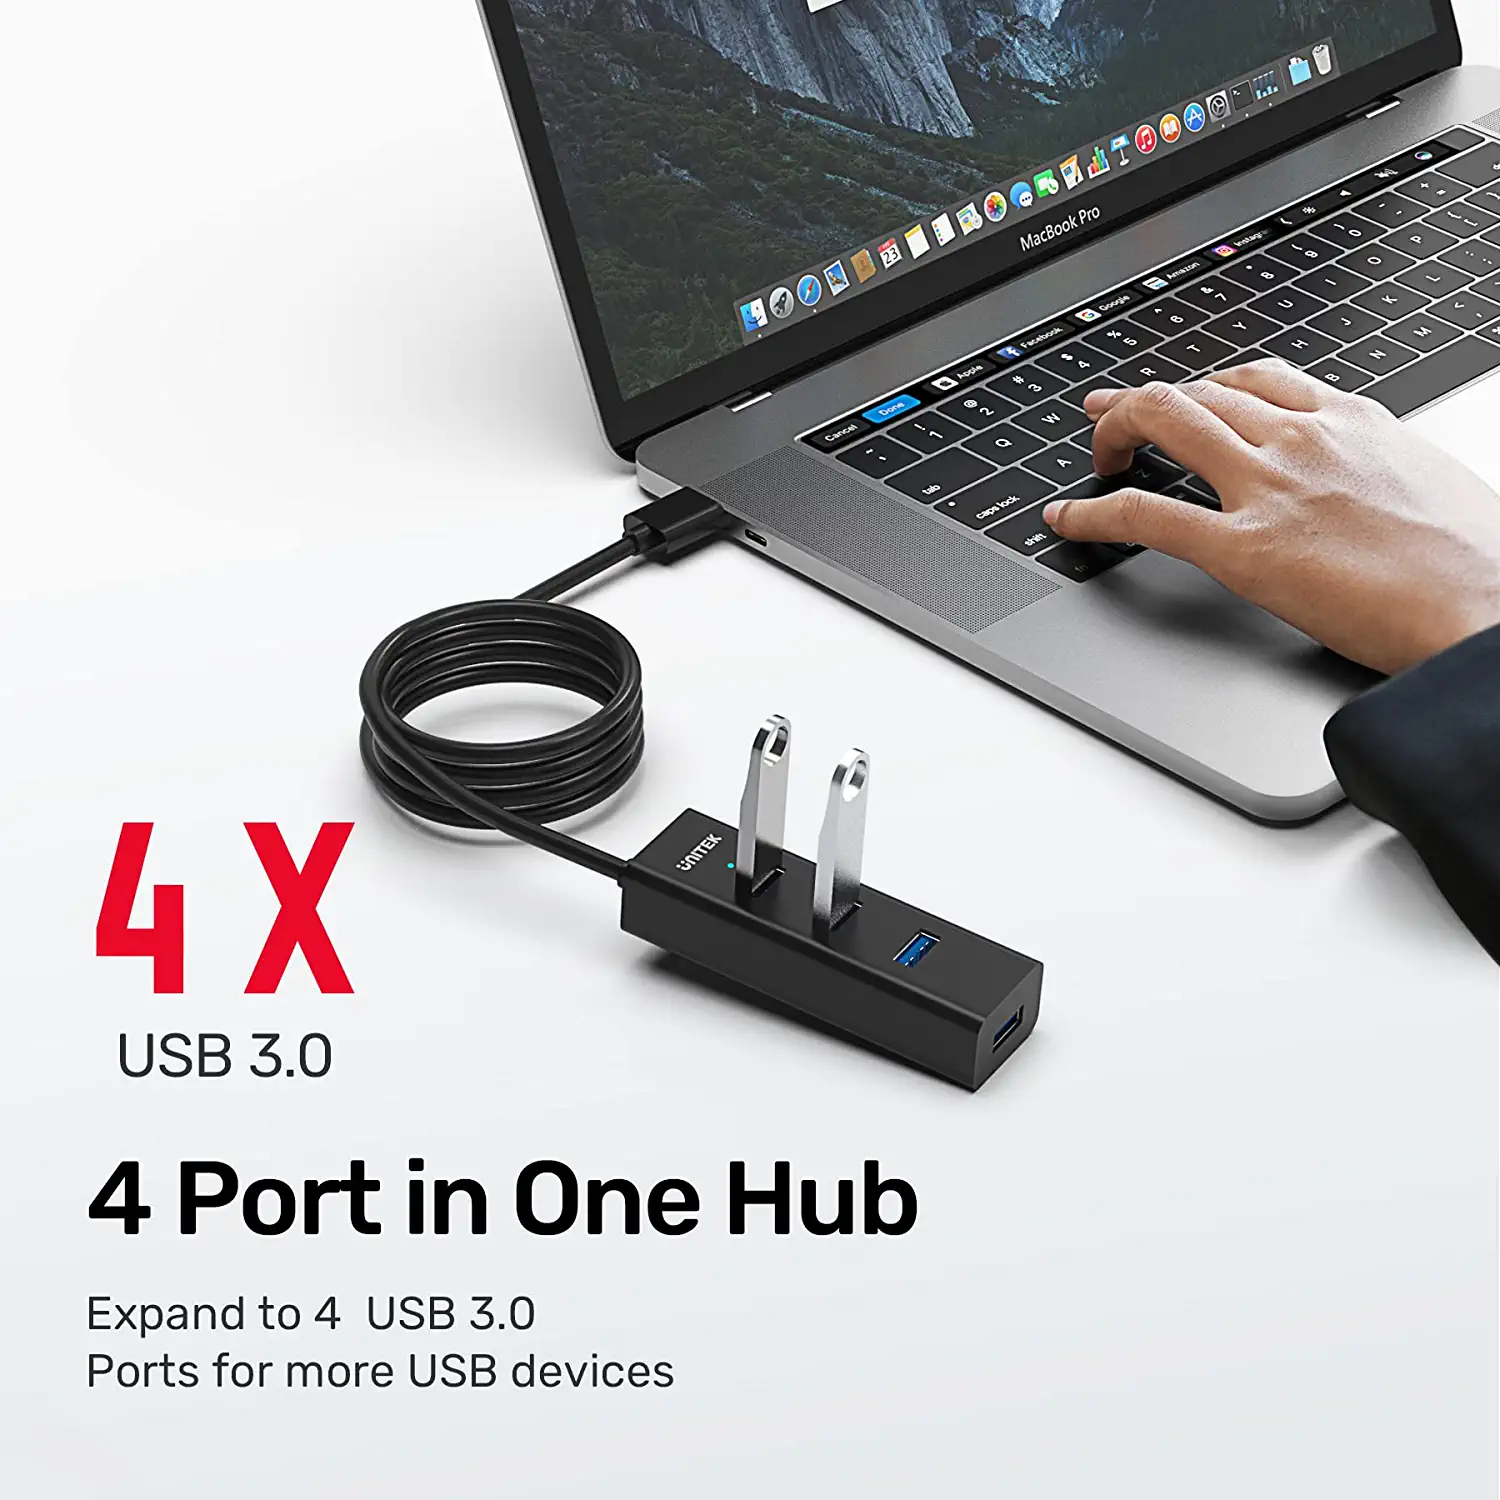 Unitek 4-Port USB 3.0 Hub, 4 Ft Long Cable USB Extension Multiple Port Splitter with Micro USB Charging Port Compatible for Windows PC, Laptop,Flash Drive,Wireless Mouse Keyboard (Support Charging) - image 2 of 7